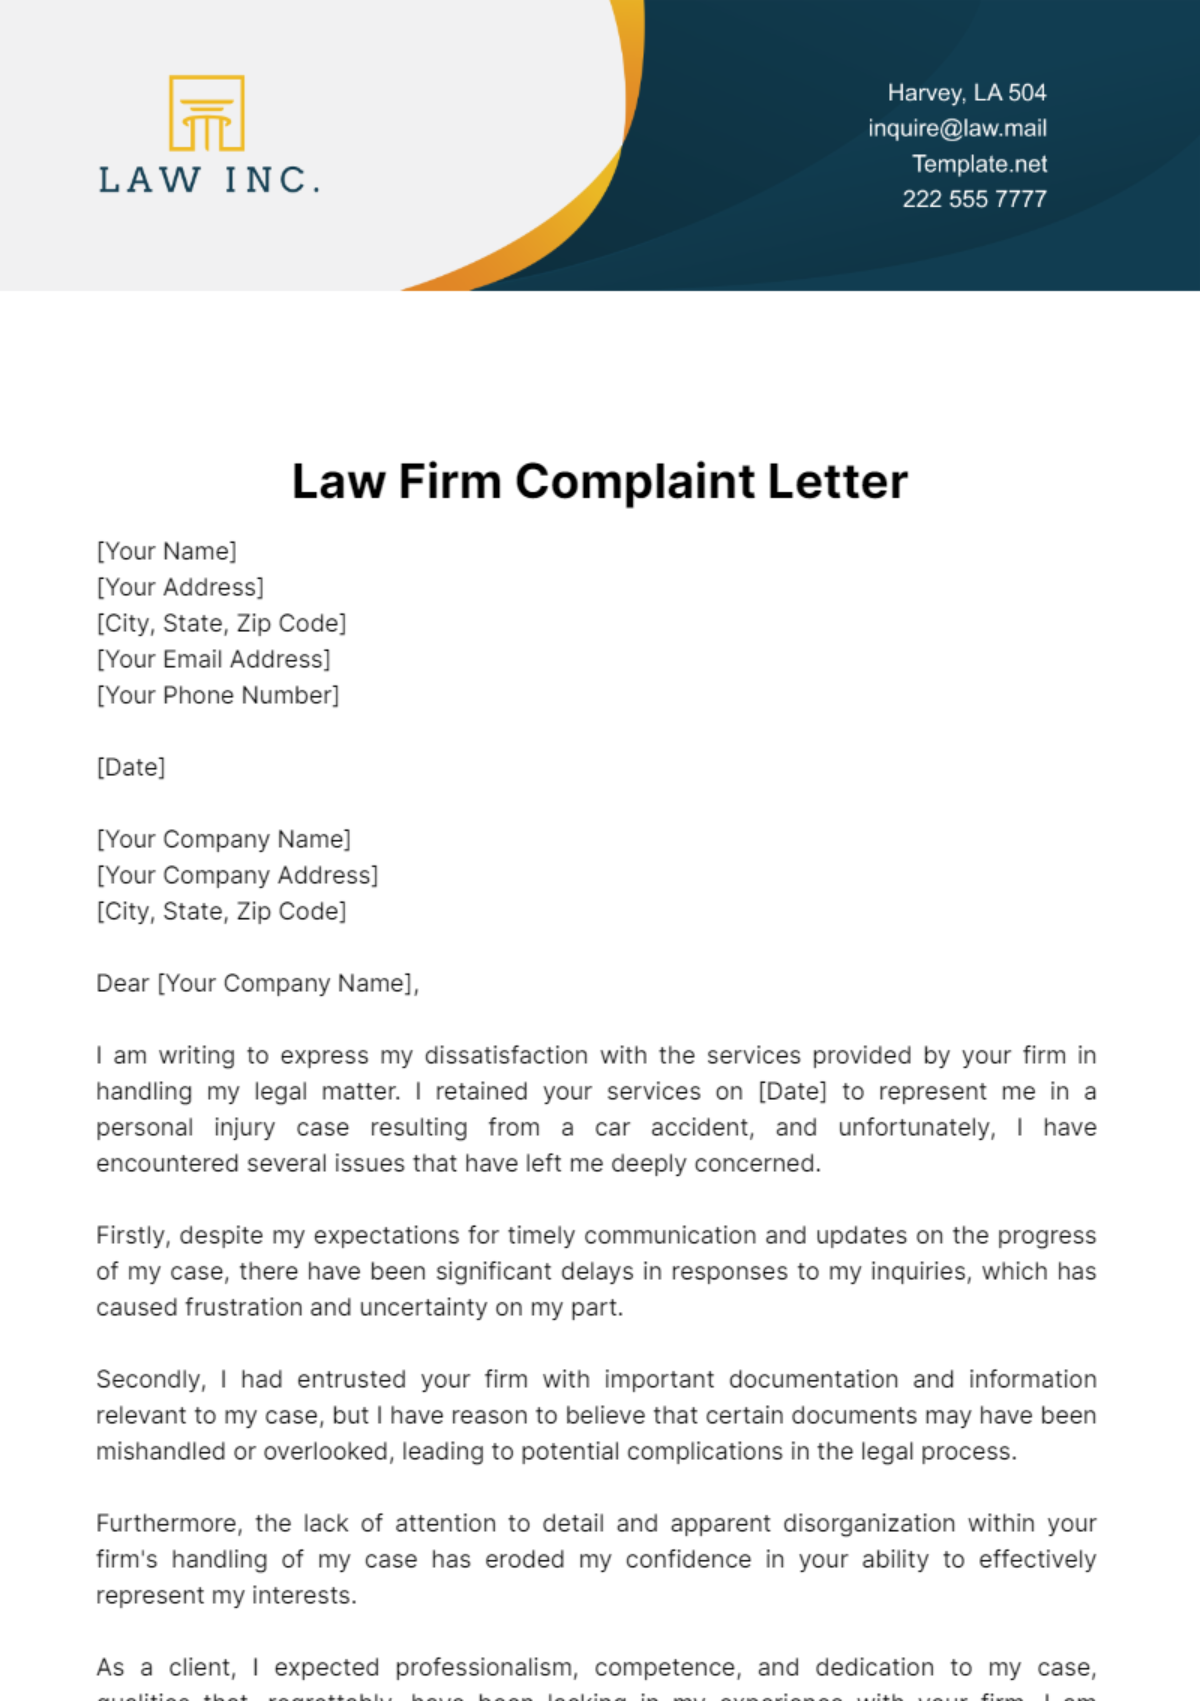 Free Law Firm Complaint Letter Template